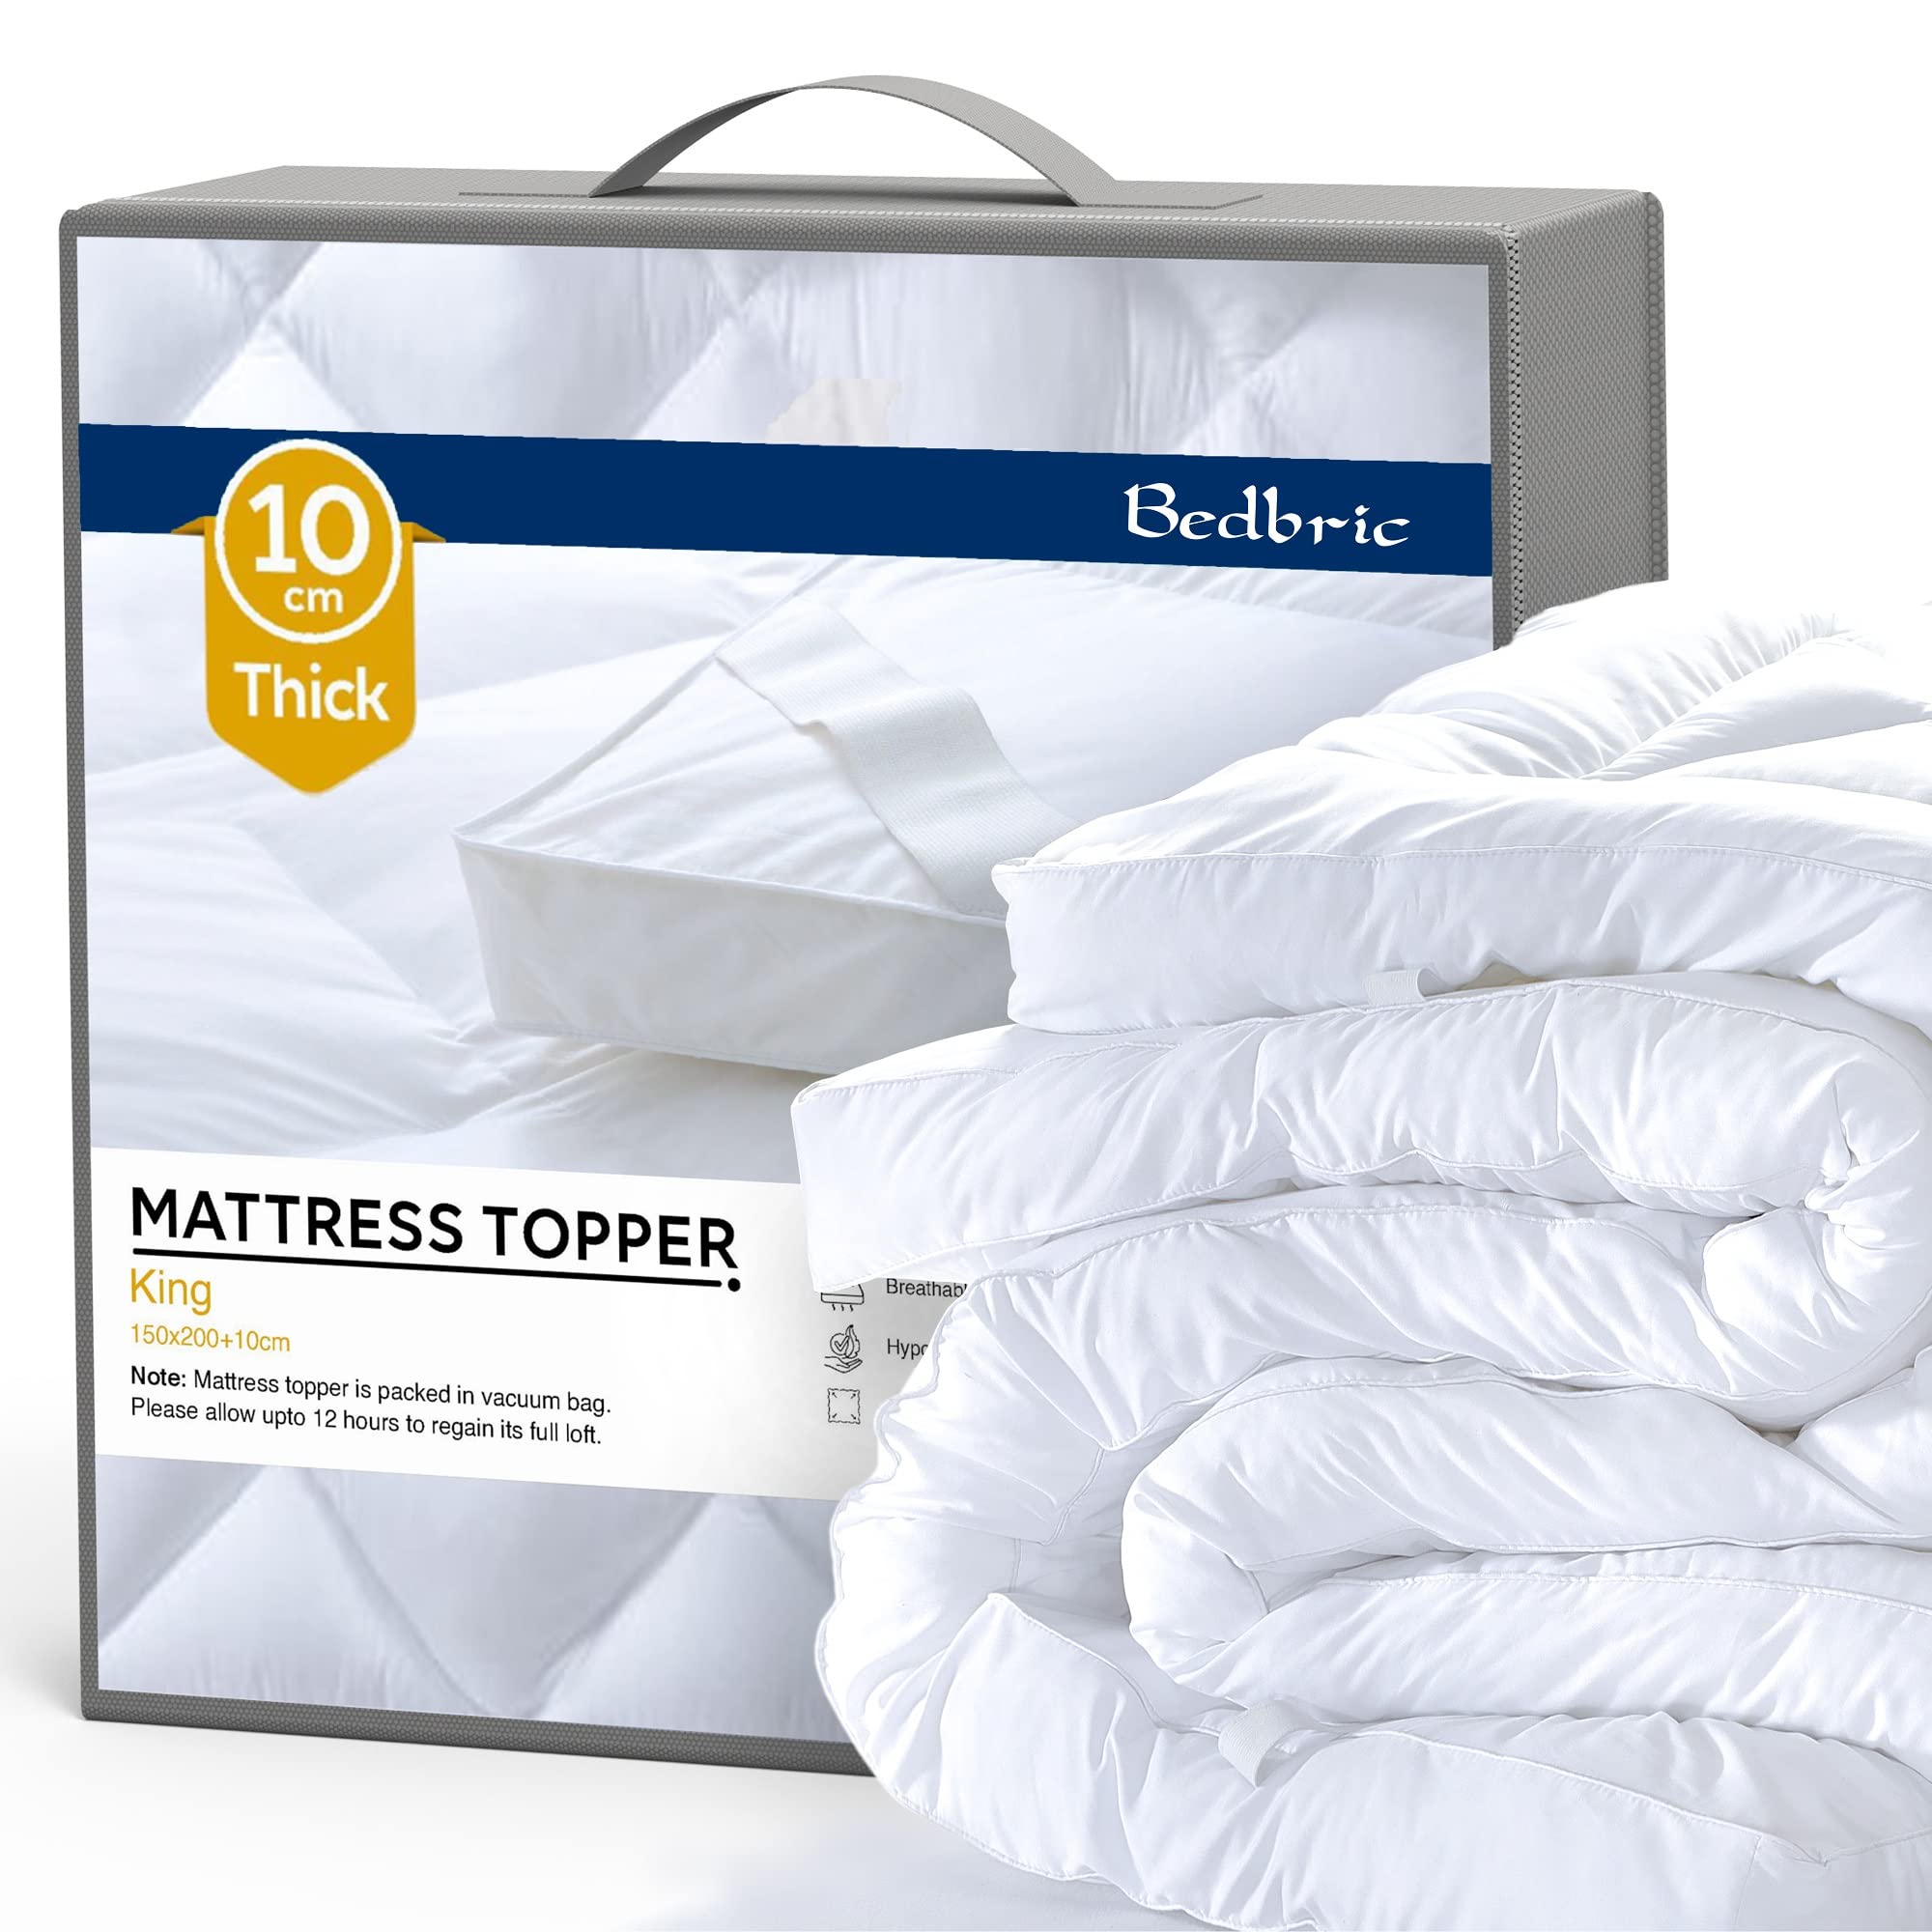 Bedbric King Size Mattress Toppers 4 Inches Thick - Soft & Fluffy Quilted King Size Mattress Topper - Hypoallergenic Mattress Topper with Elastic Straps